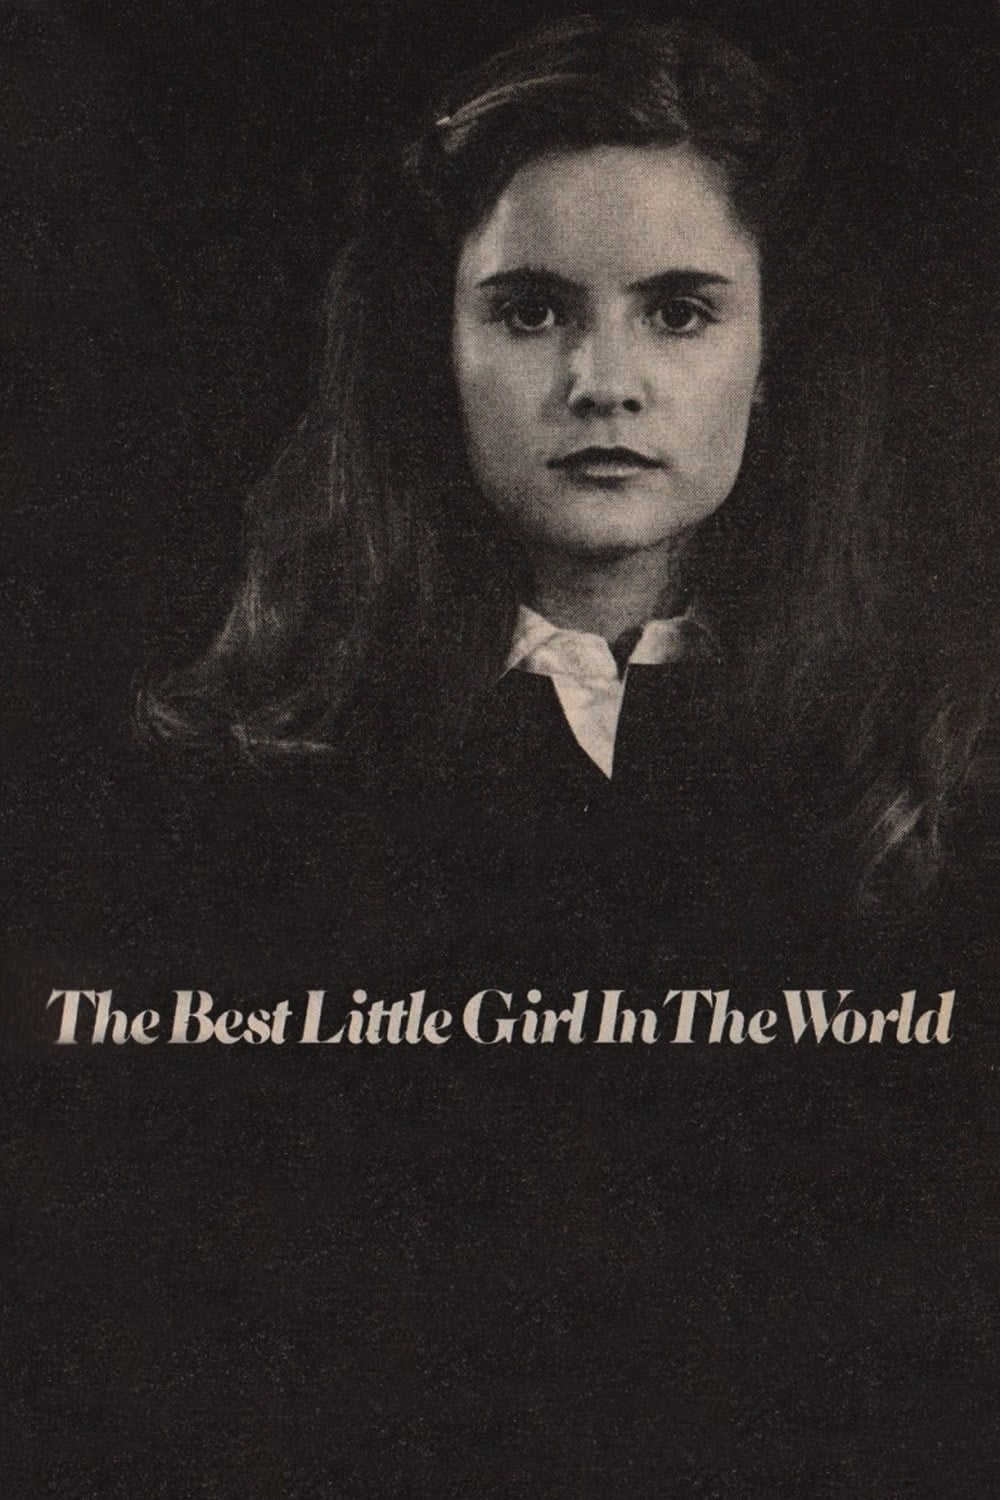 The Best Little Girl in the World (1981)